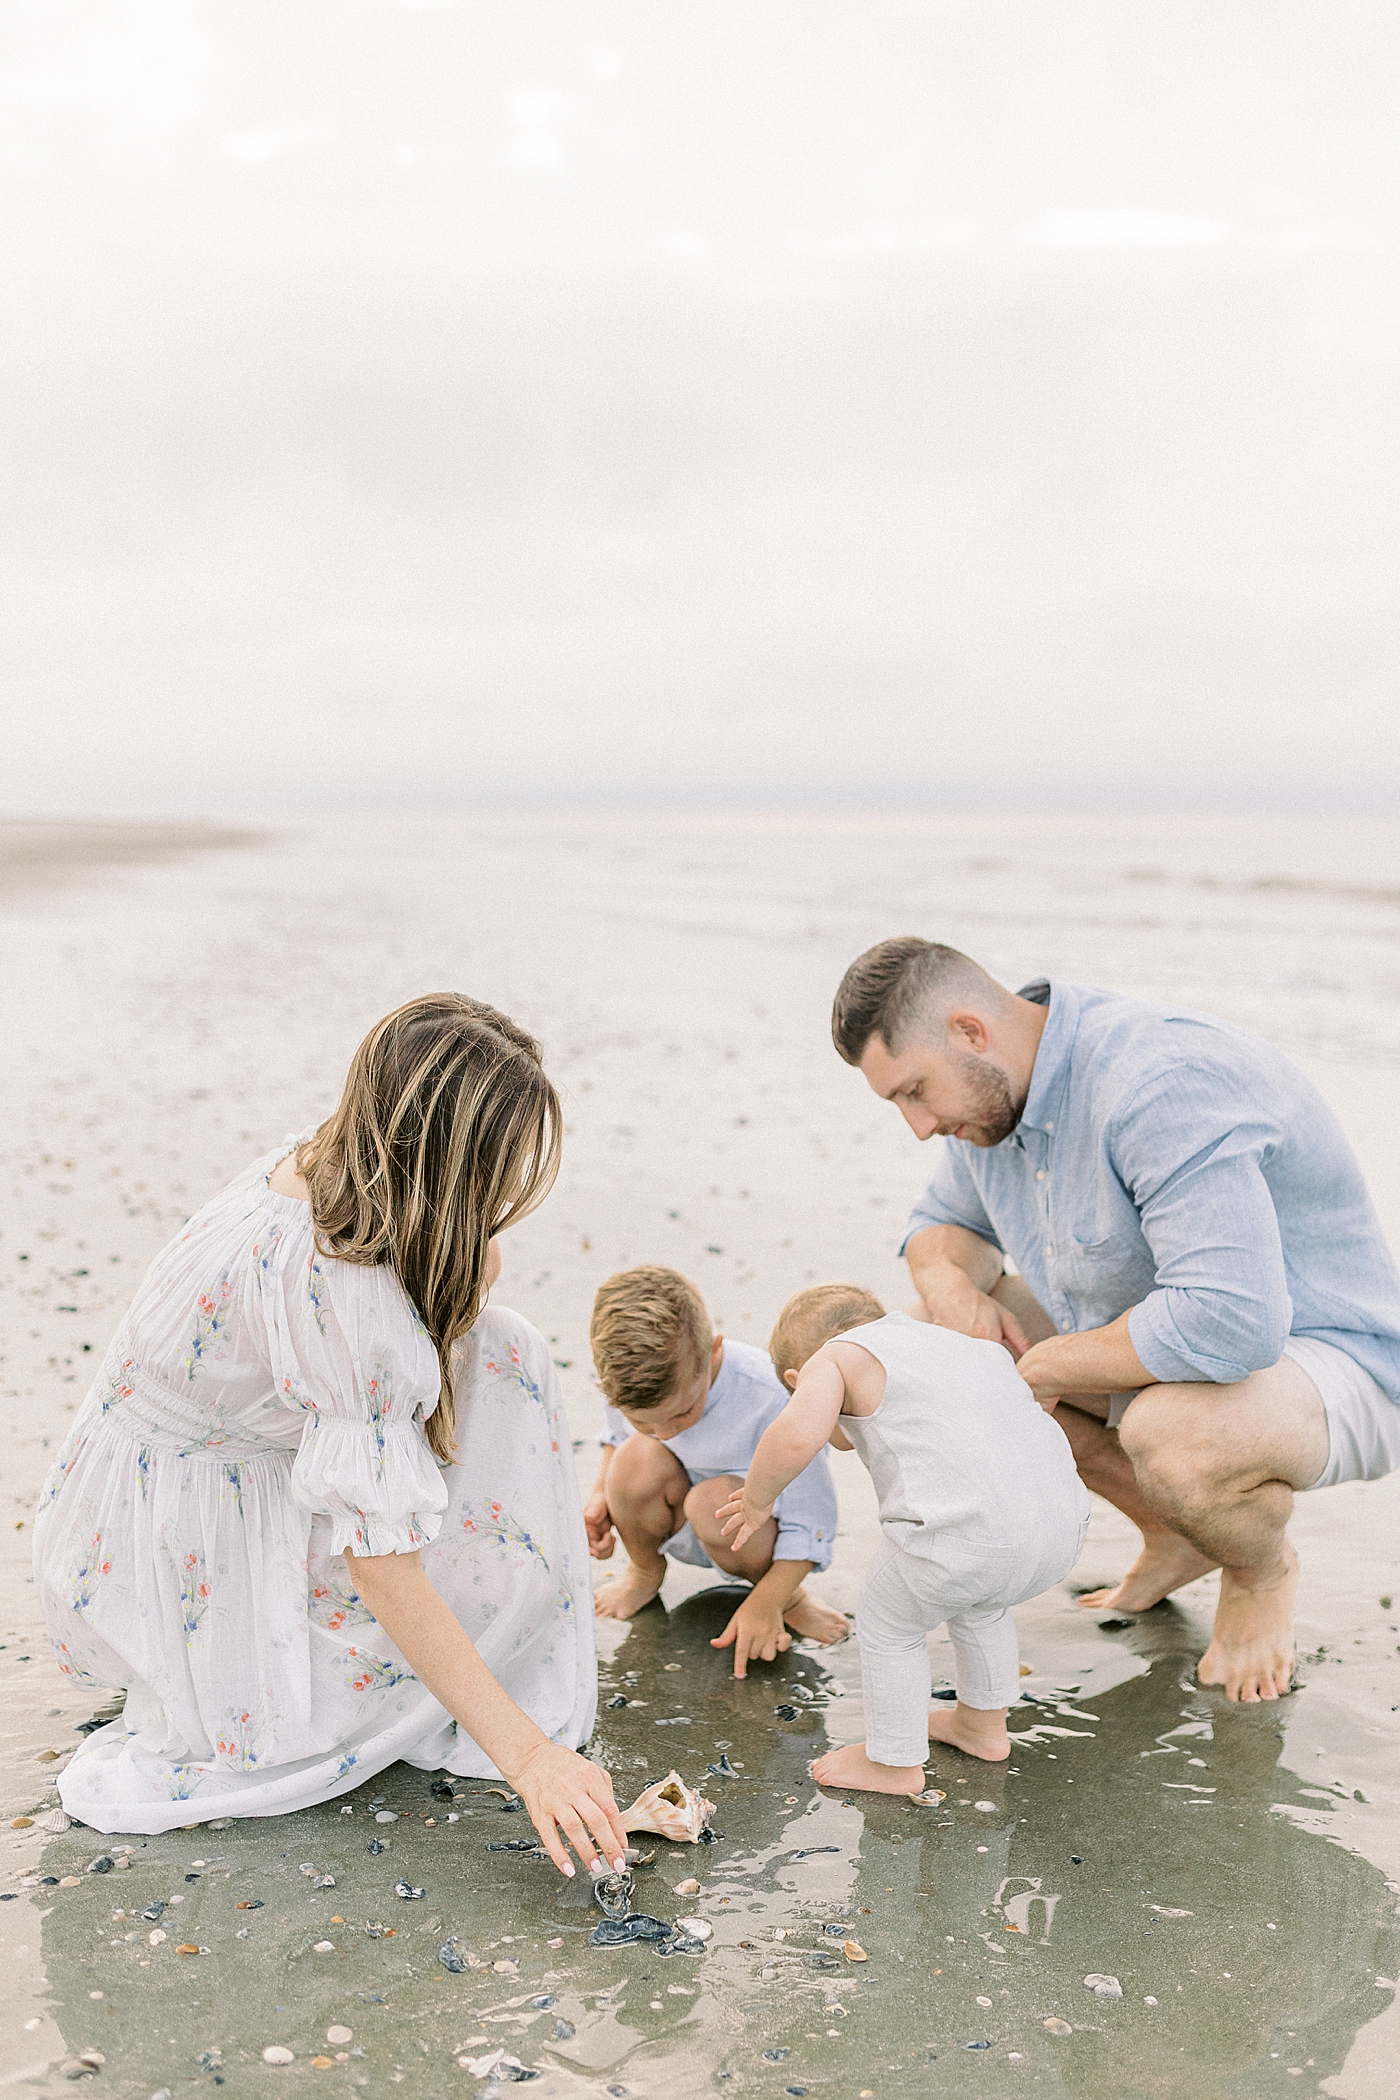 Family of four searching for shells | Image by Caitlyn Motycka